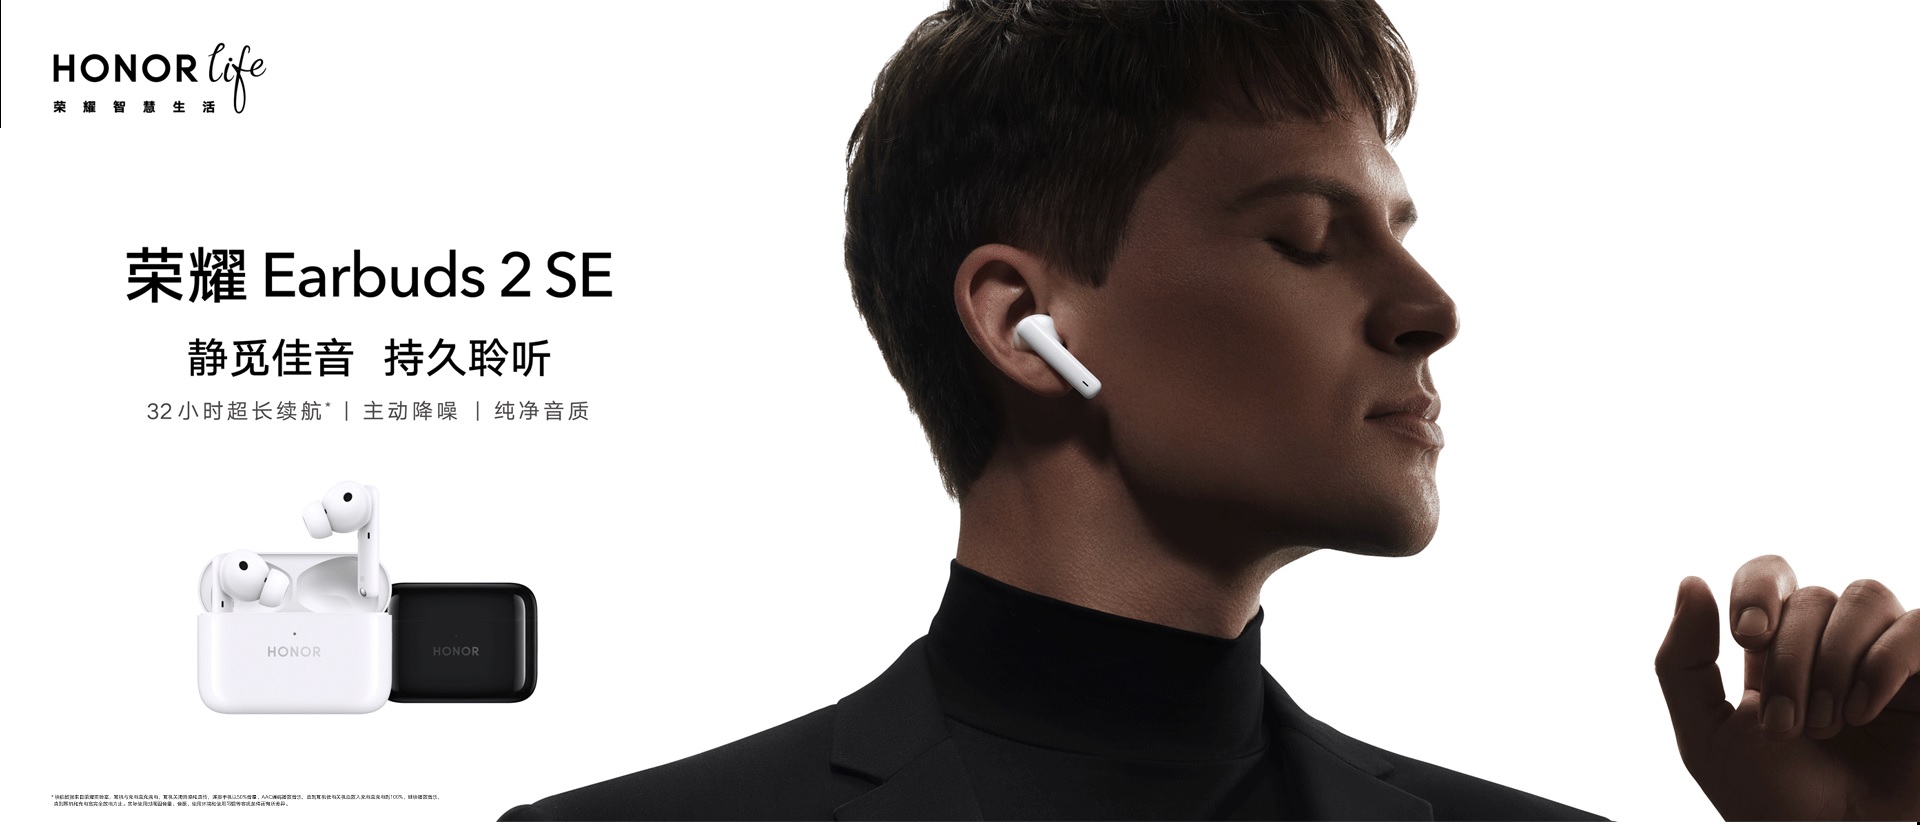 Honor Earbuds 2 SE featured